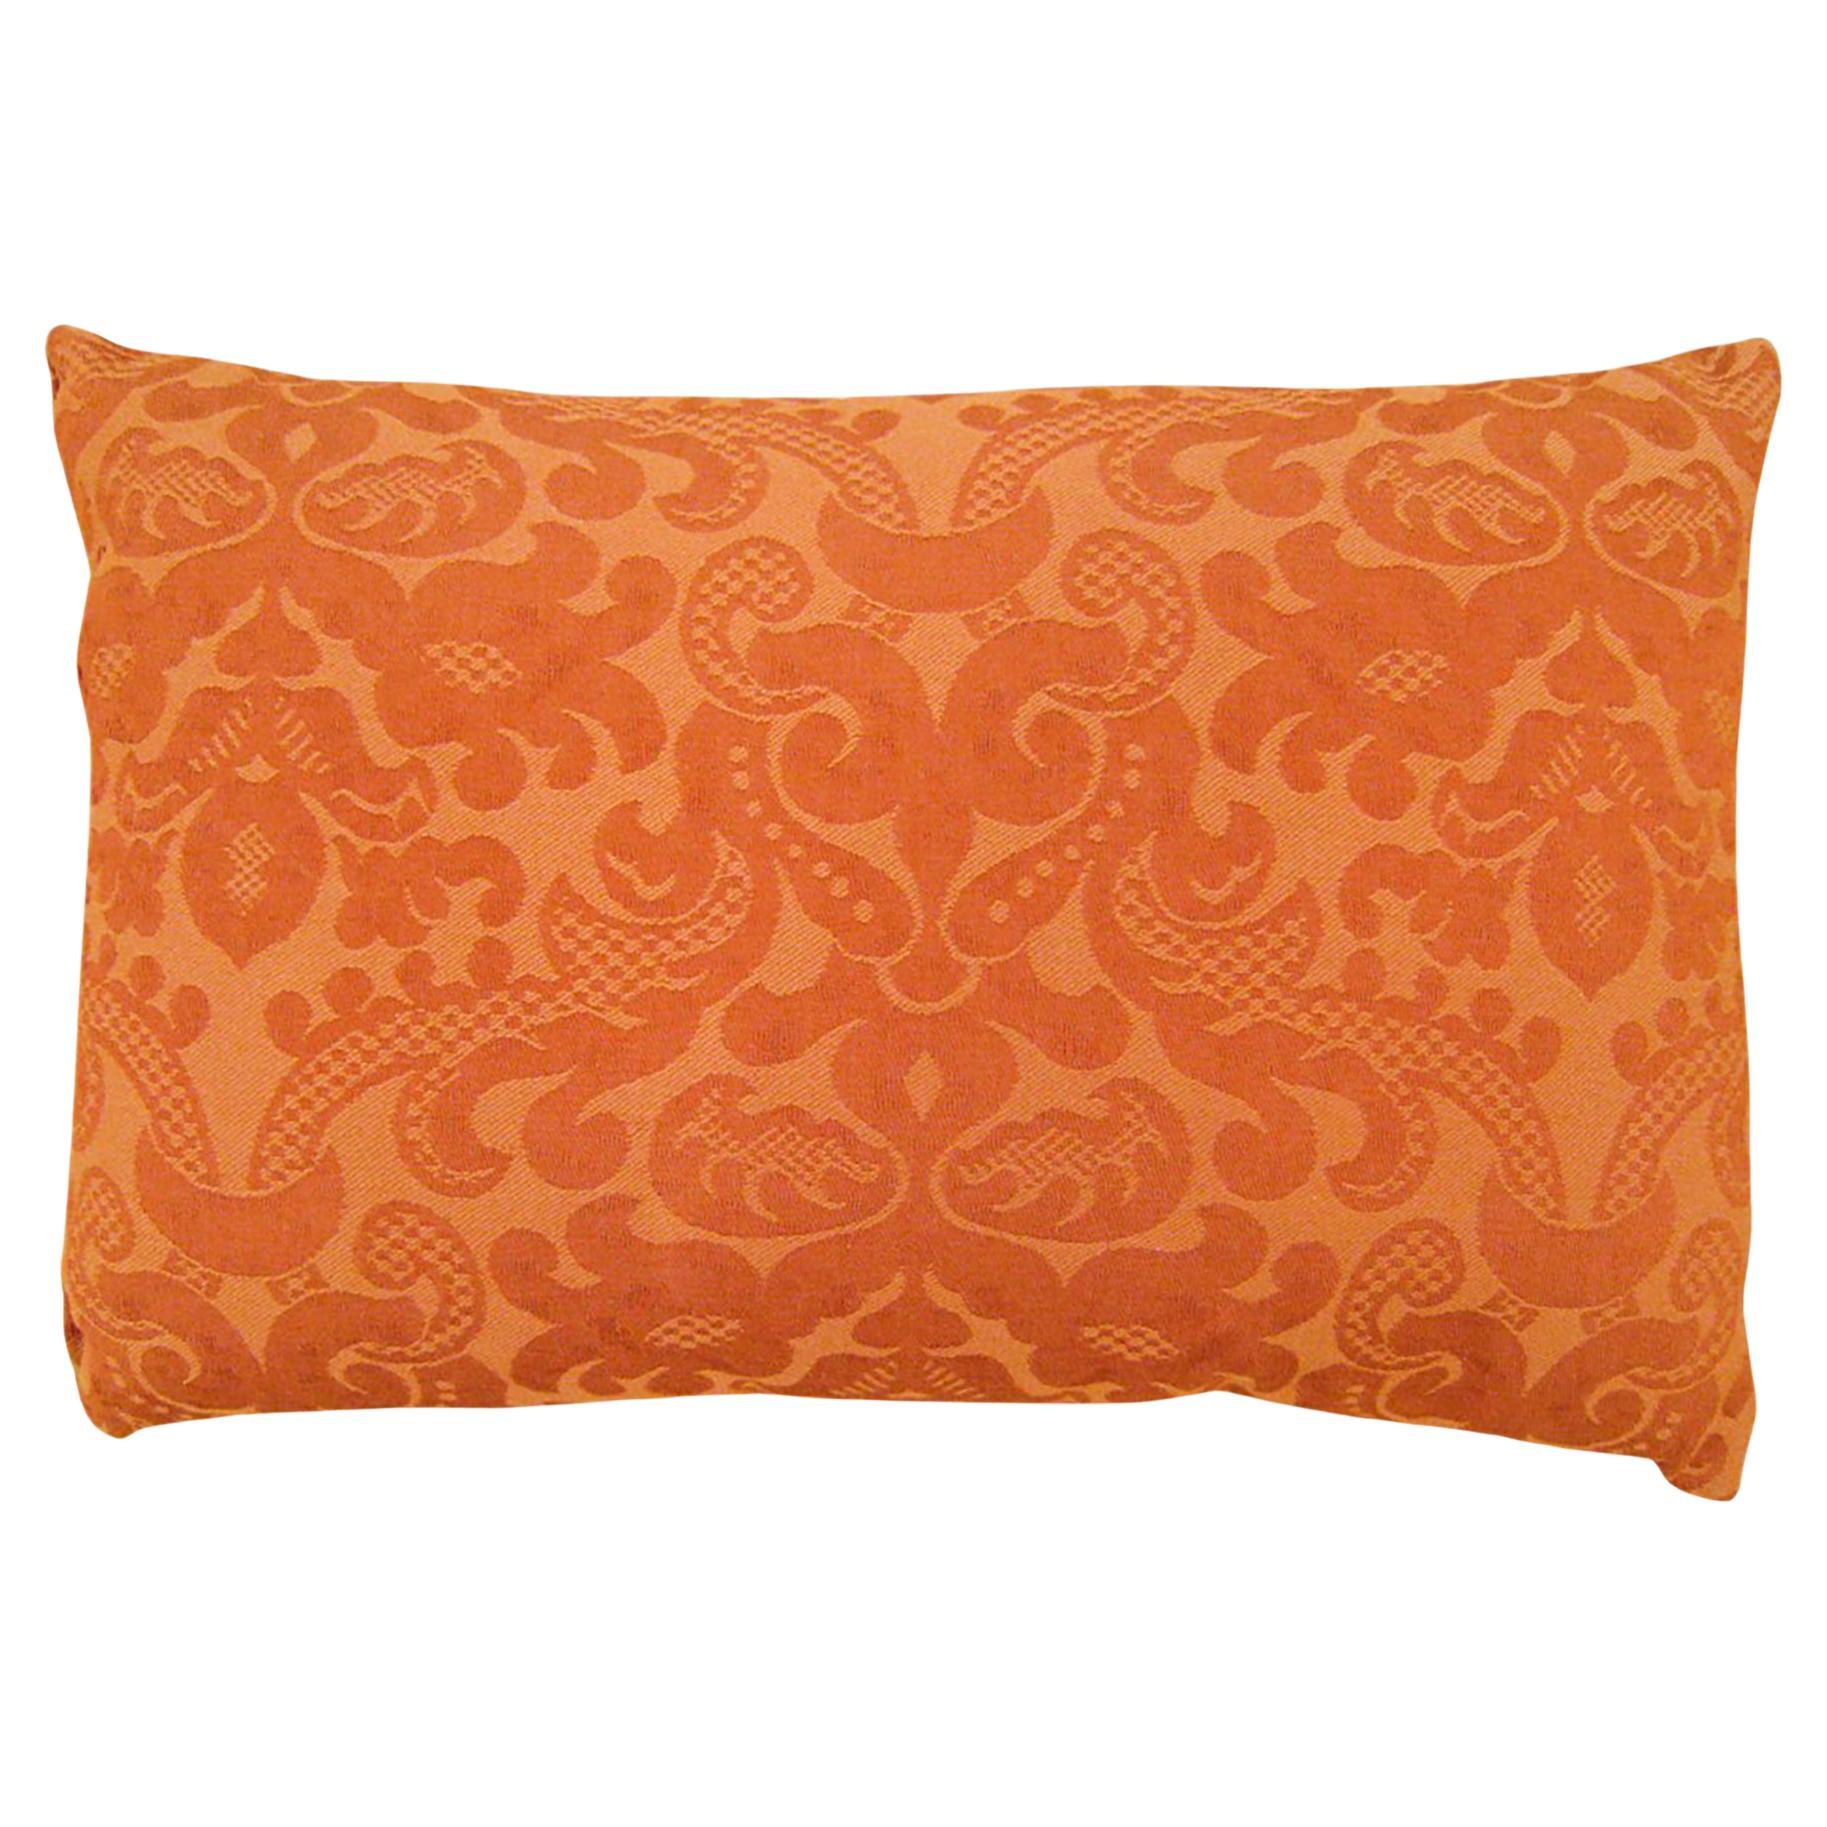 Vintage Decorative Double-Sided French Floral Textile Pillow